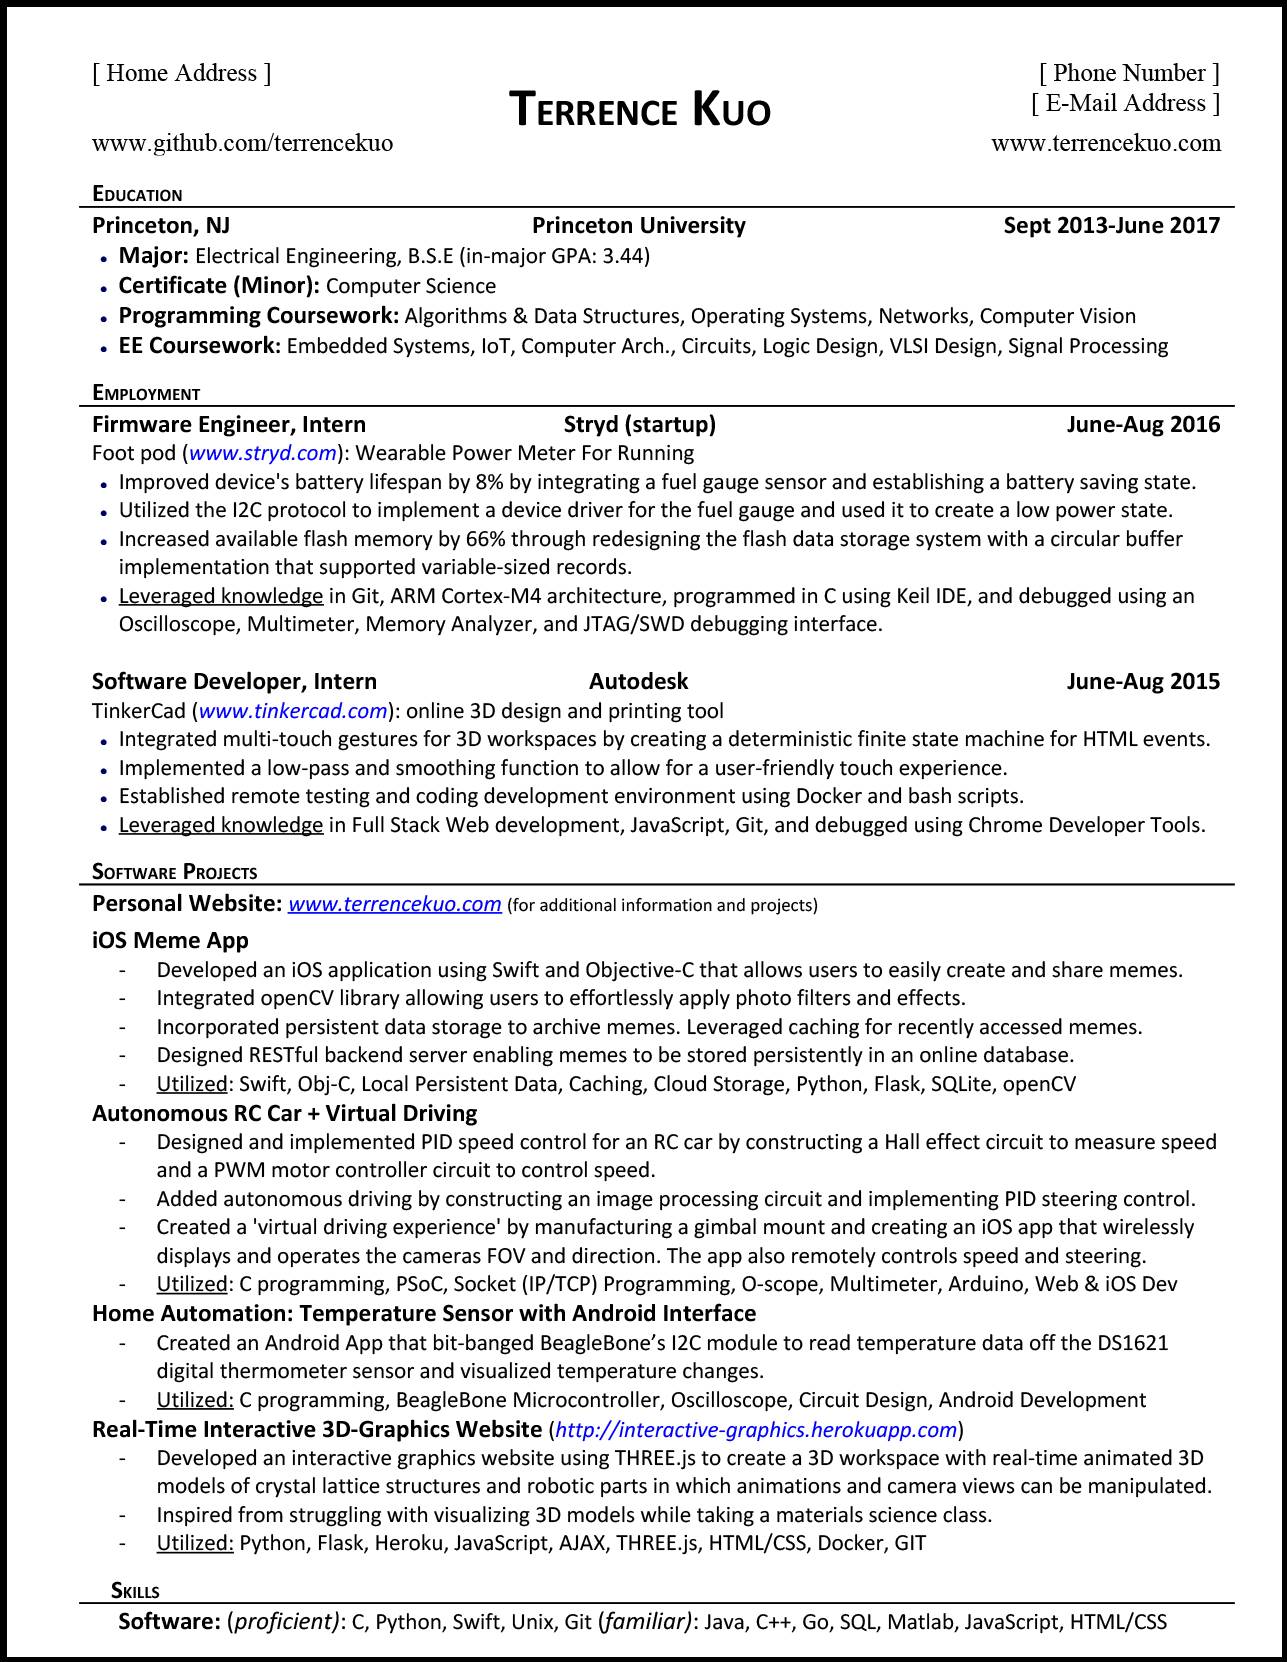 How to write a killer Software Engineering résumé